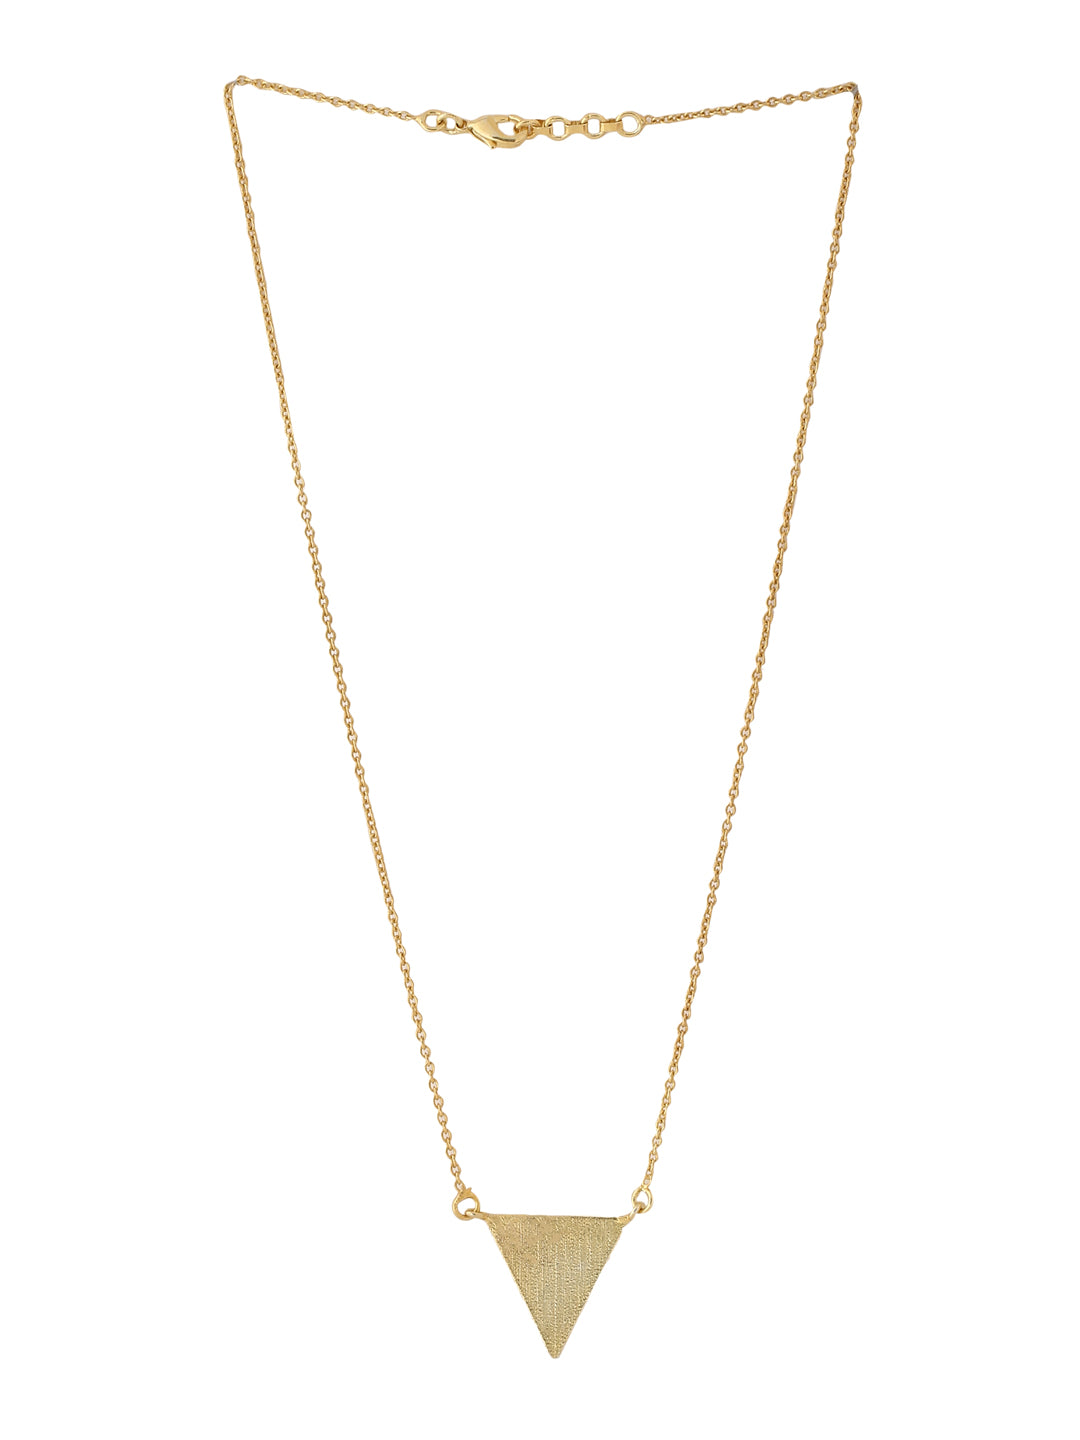 Gold Necklace with Double Triangle Pendant – Drumgreenagh